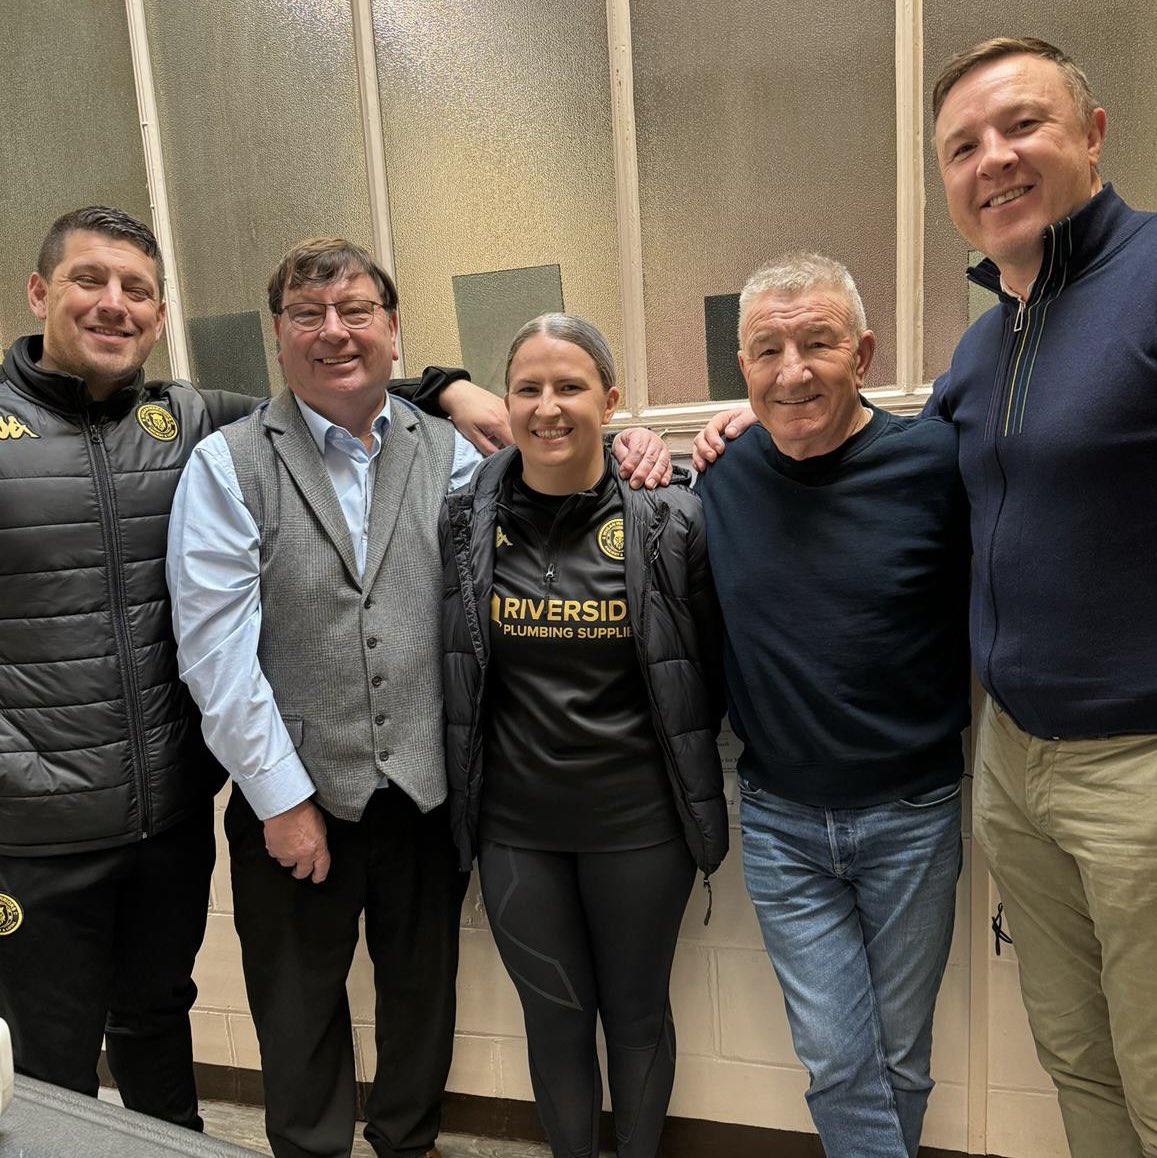 The Uncle Joe’s factory hosted today’s Mike Sweeney Show. Wigan Warriors were interviewed about their work ethics and honest approach to the game of rugby league. Matt, Kris and Rachel were true stars in helping reinforcing everything that is good in Wigan.